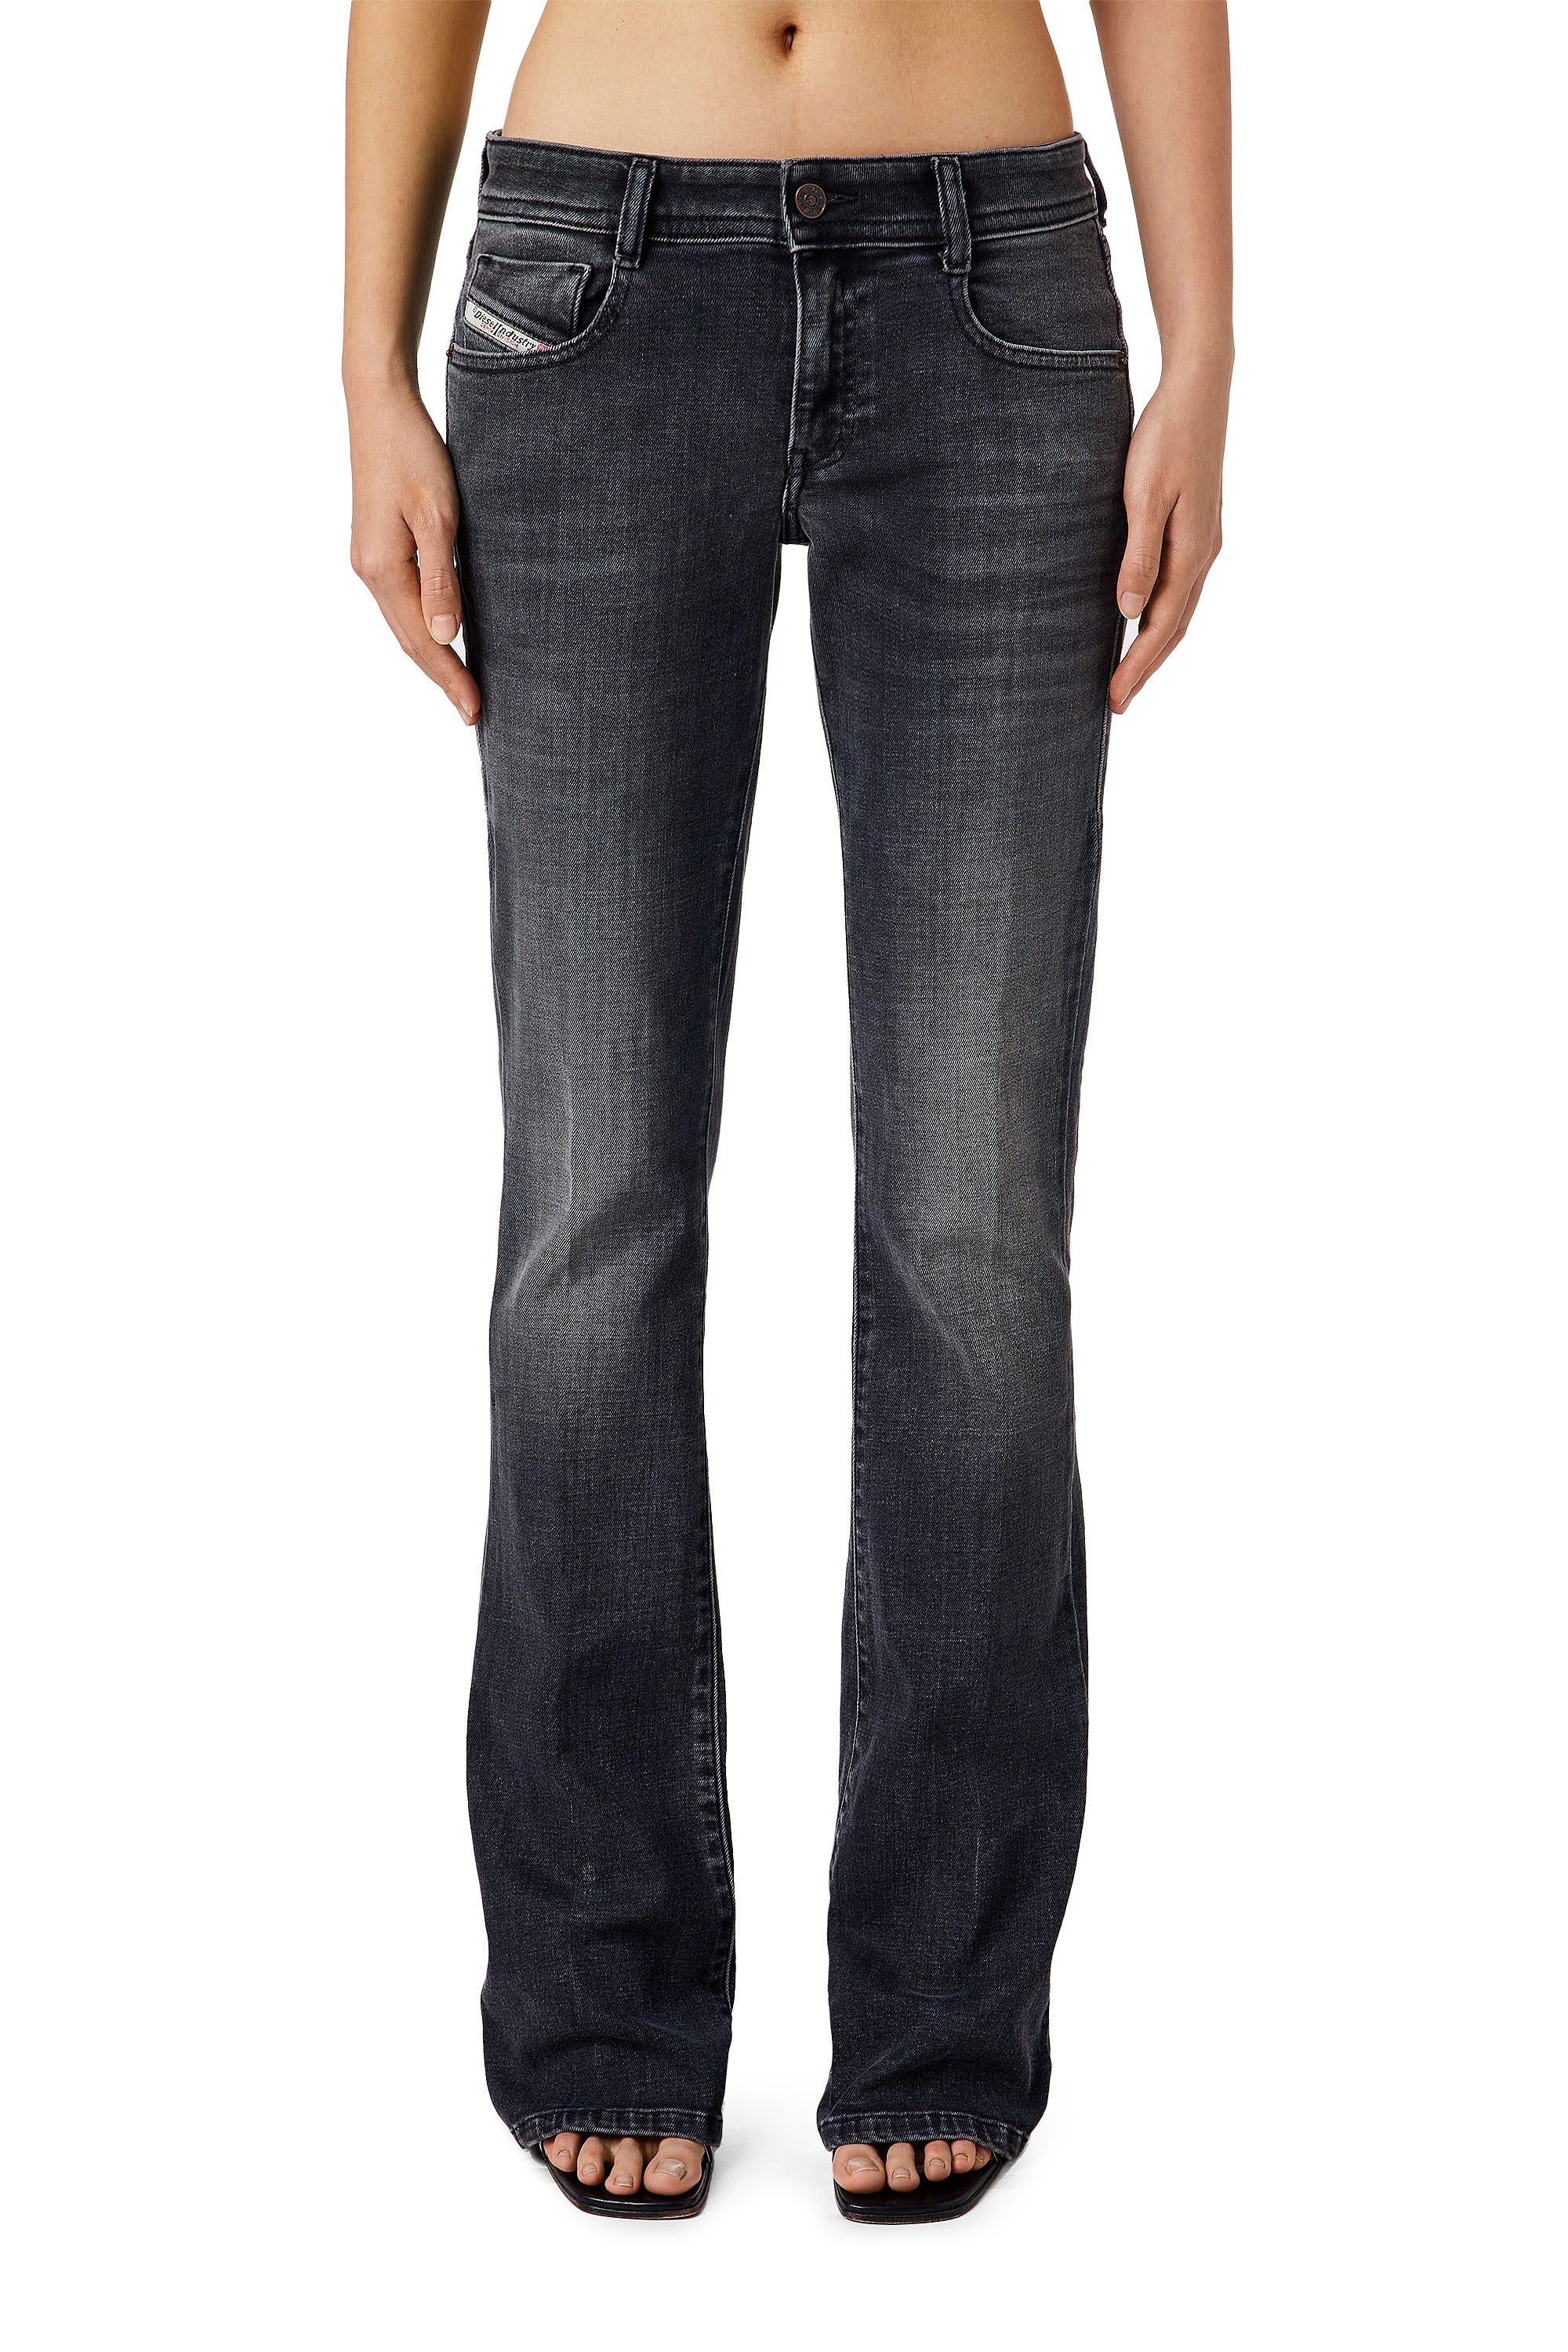 1969 D-EBBEY 0EIAG Bootcut and Flare Jeans, Nero/Grigio scuro - Jeans